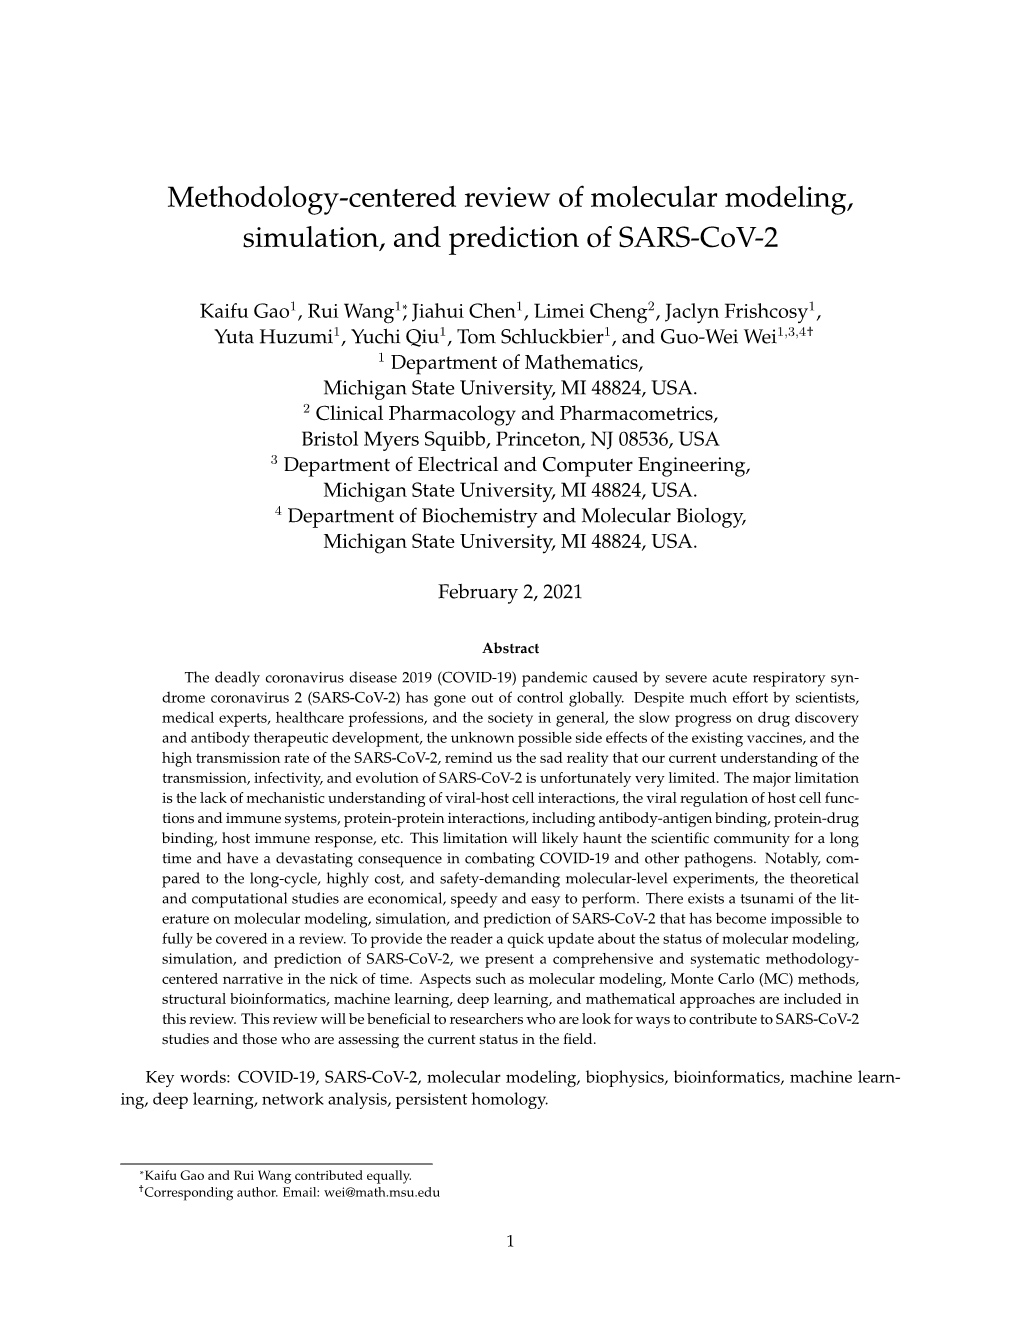 Methodology-Centered Review of Molecular Modeling, Simulation, and Prediction of SARS-Cov-2